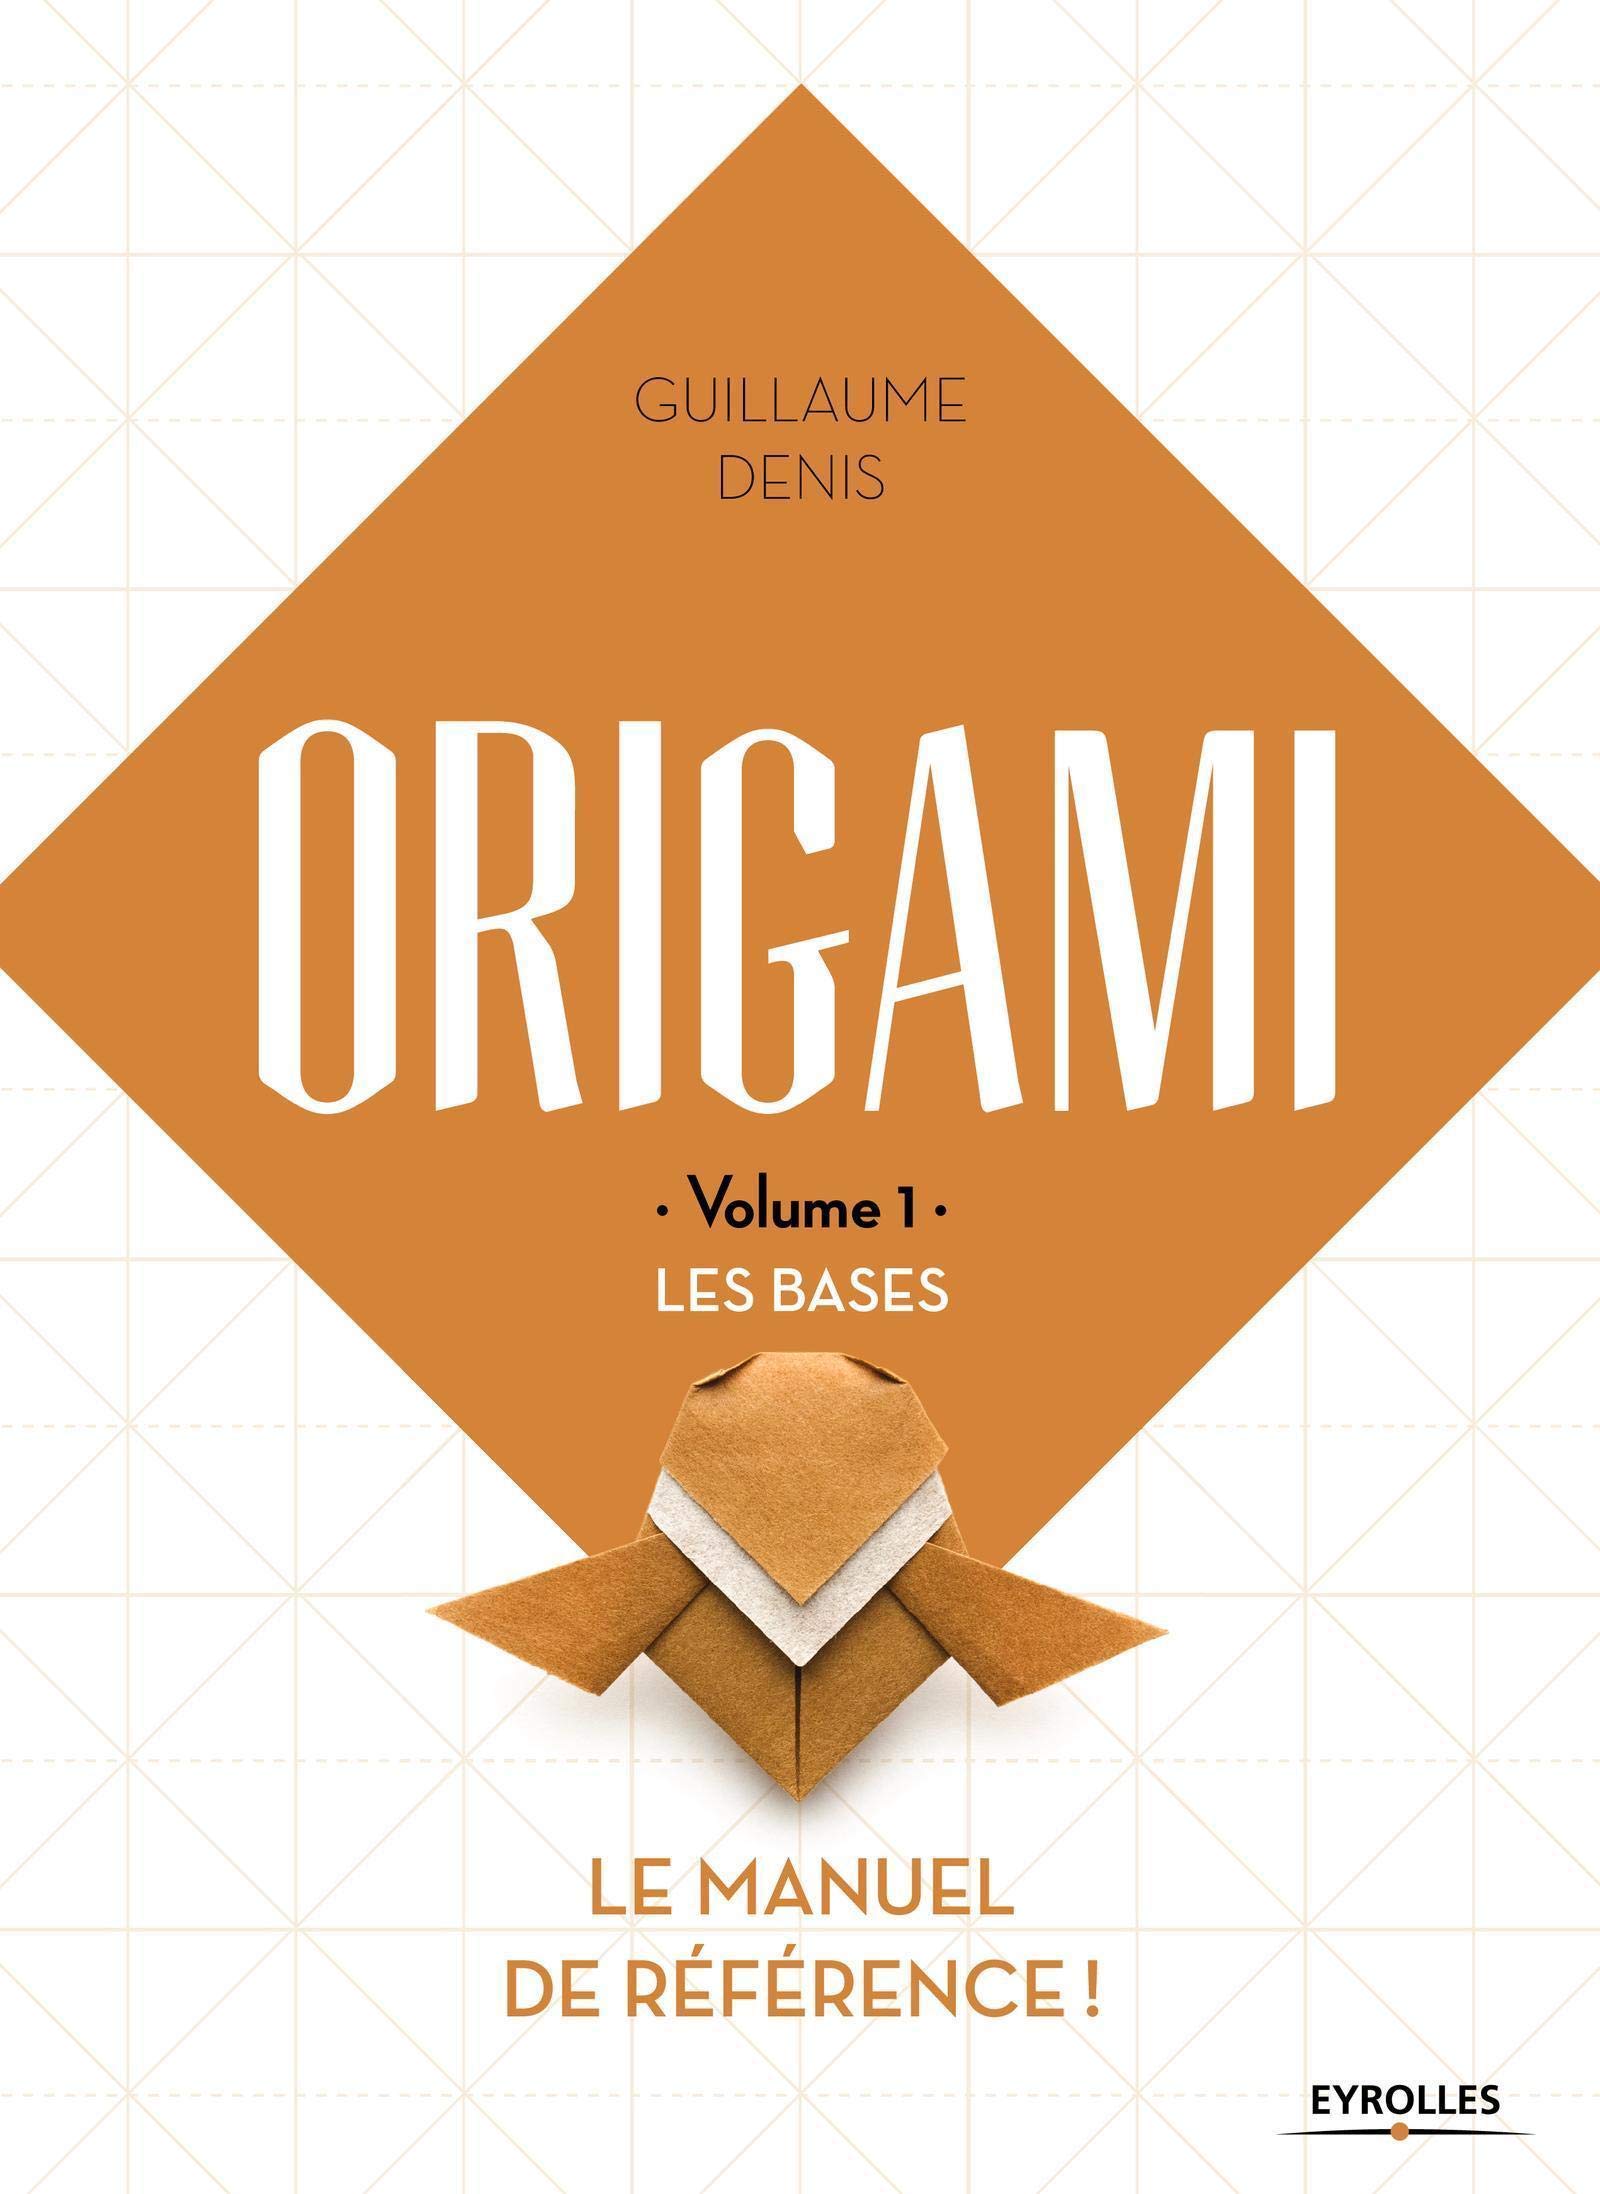 ORIGAMI - Volume 1 - LES BASES : page 63.